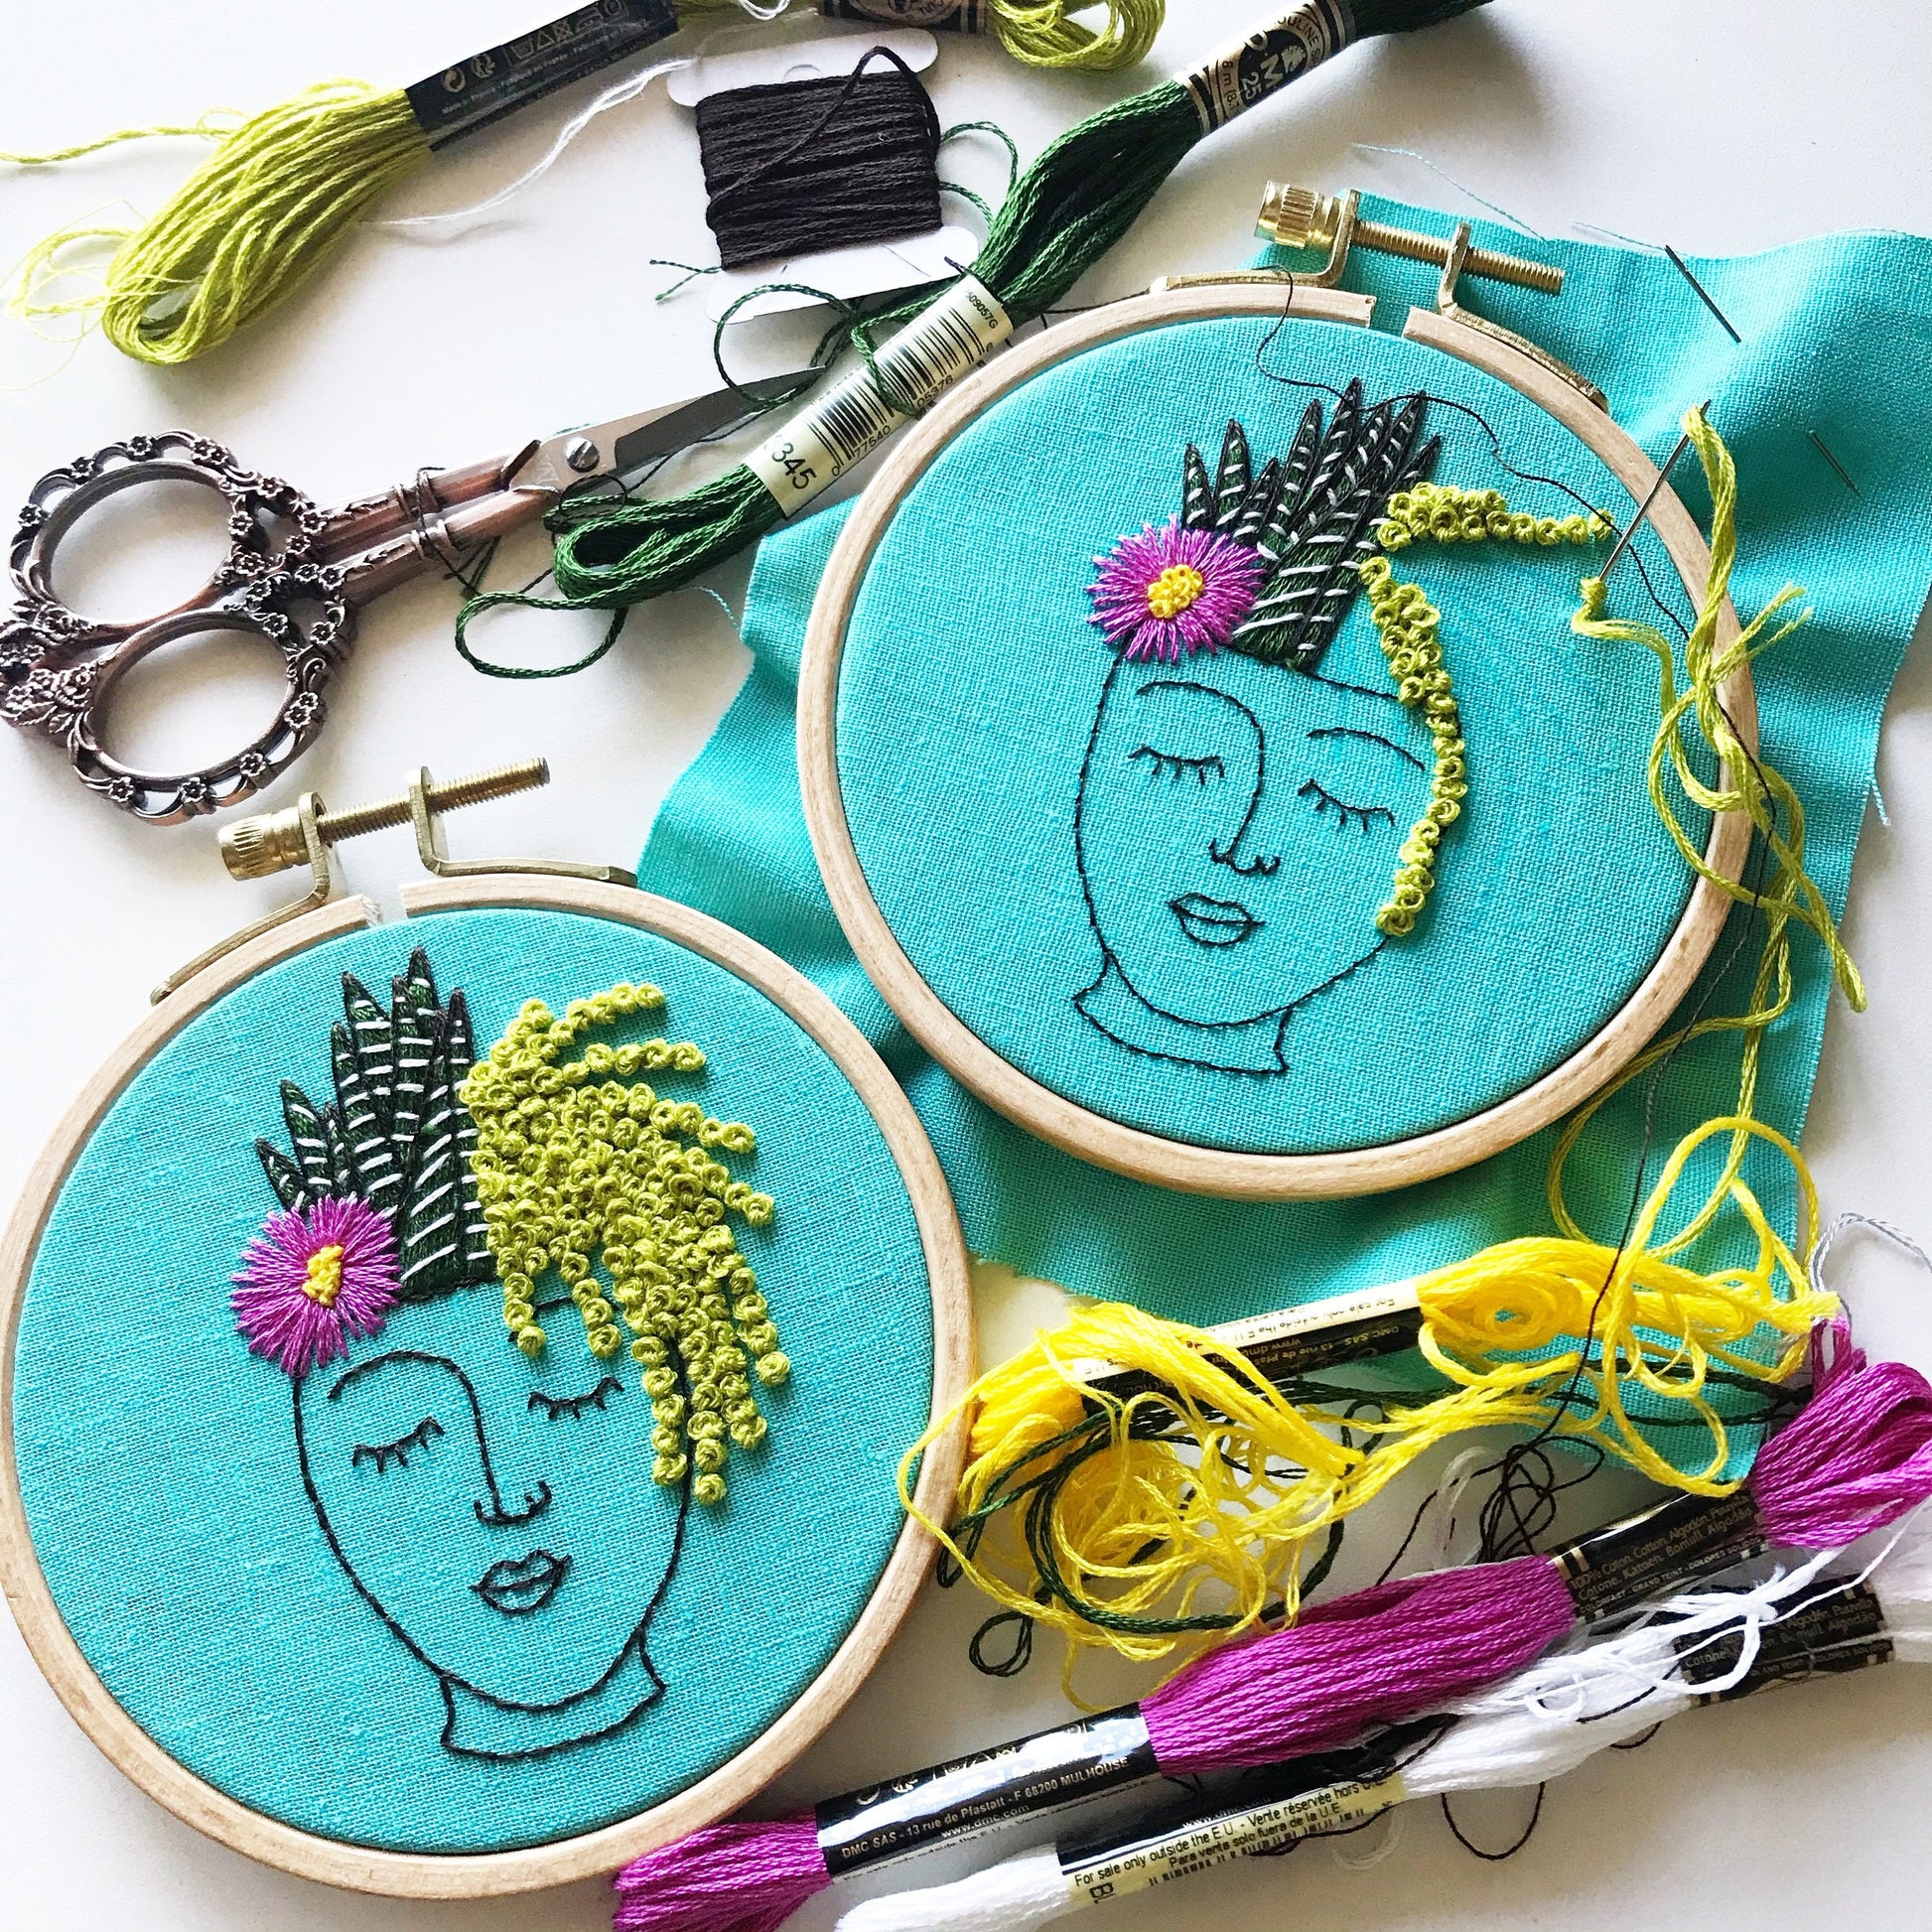 Big Sur: Beginner Embroidery Kit – Rosanna Diggs Embroidery